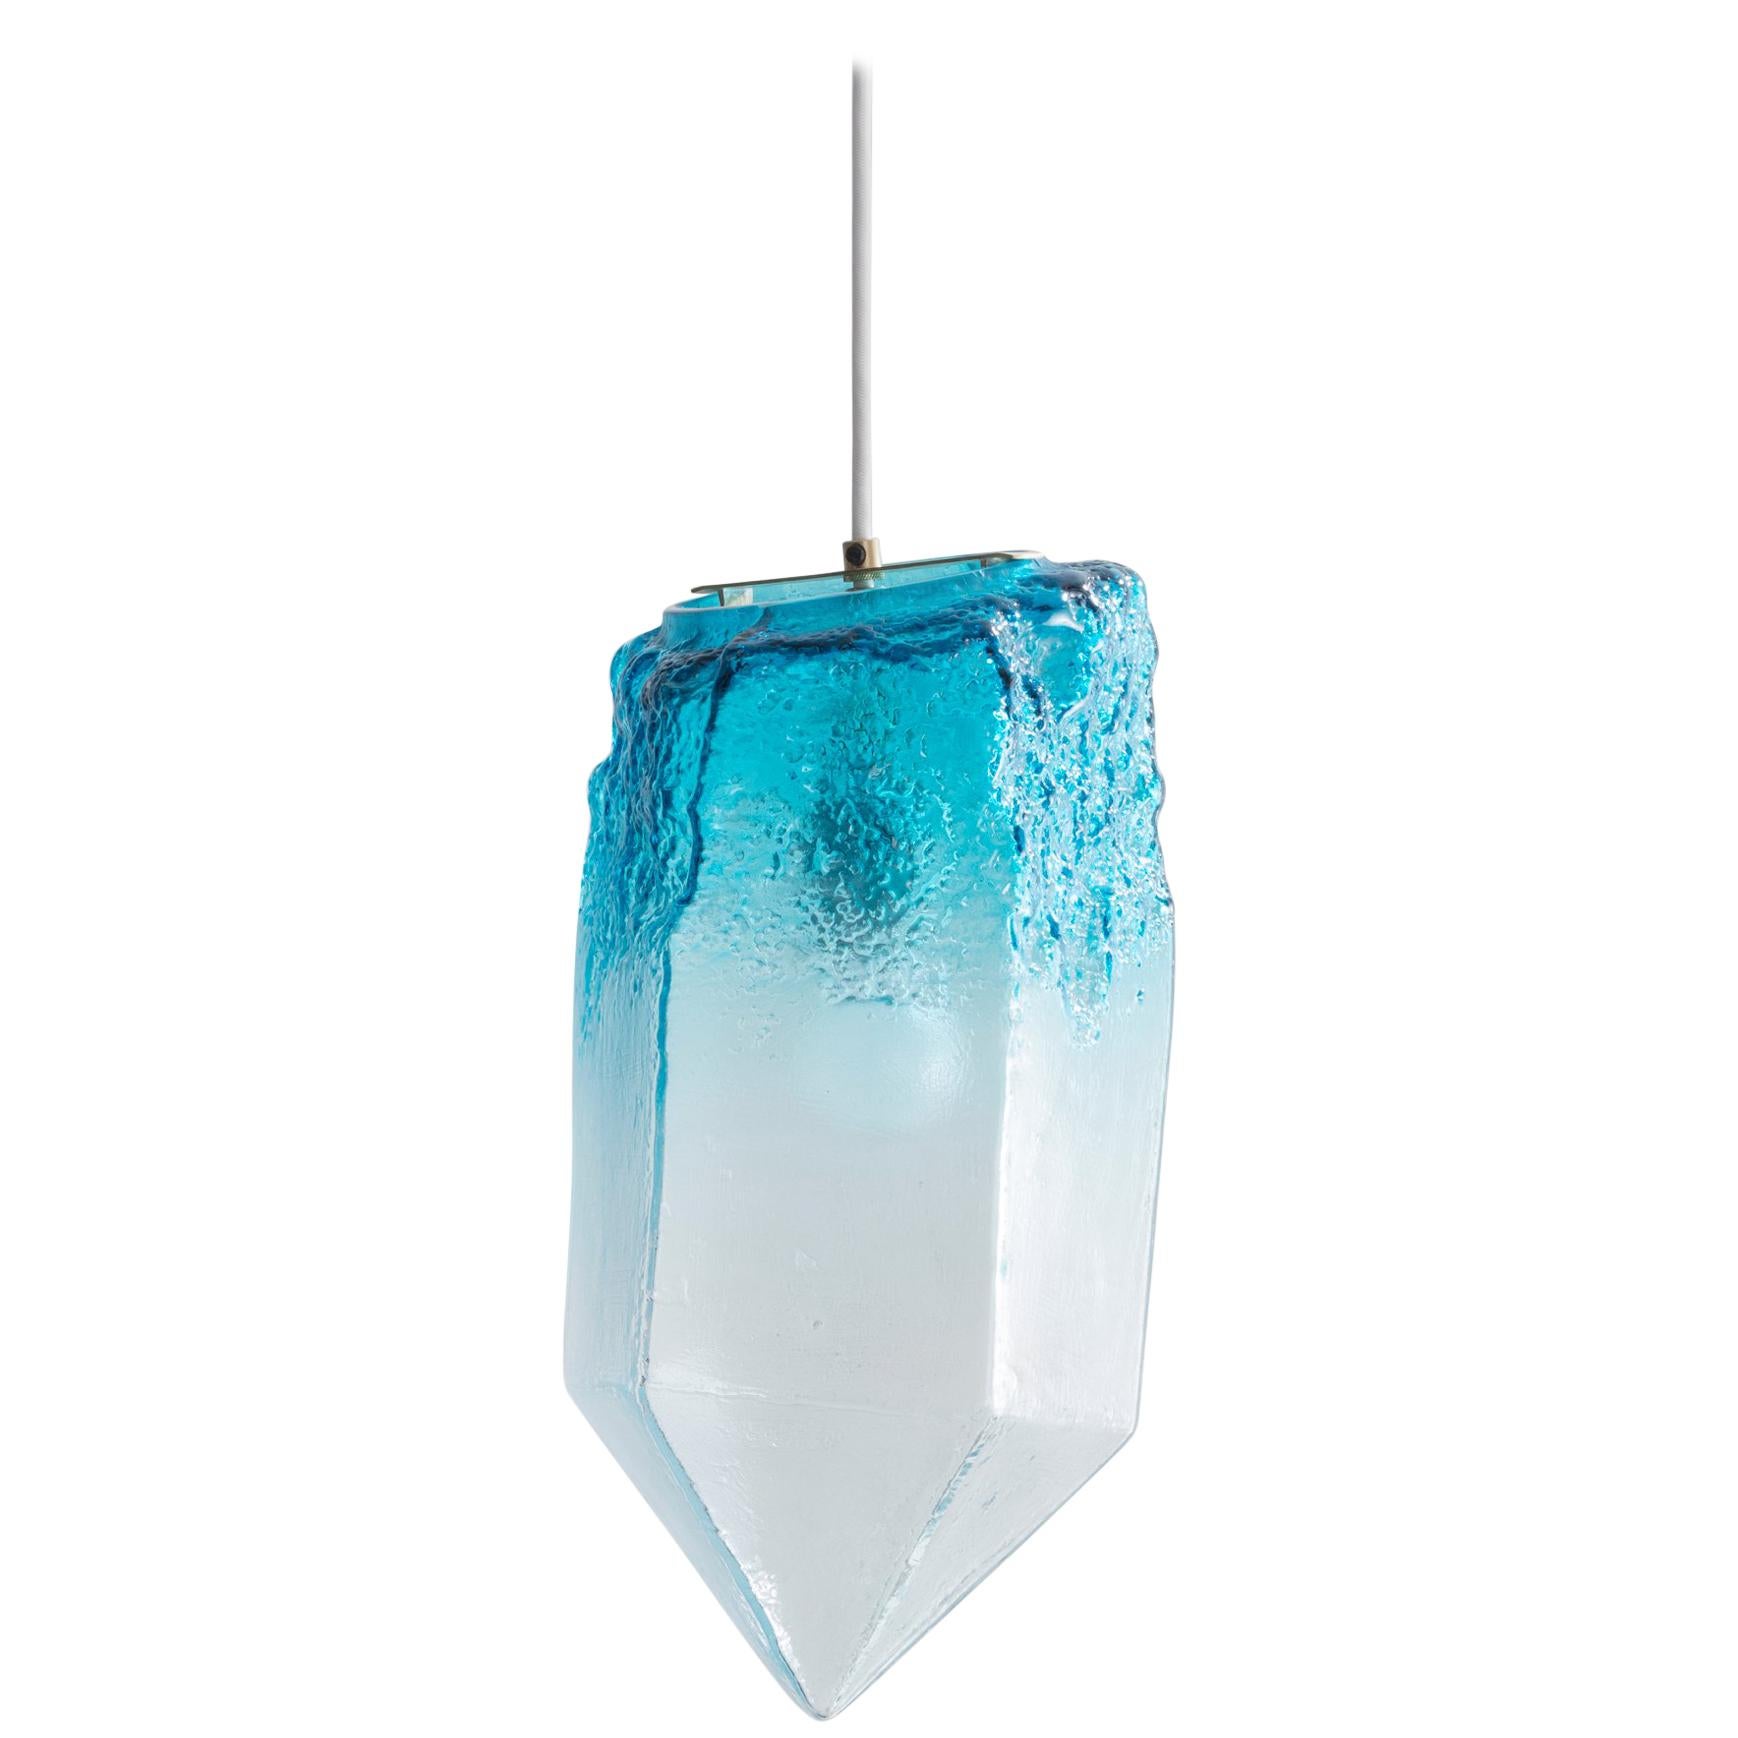 Sculptural Pendant Light in Turquoise Glass by Jeff Zimmerman, 2016 For Sale